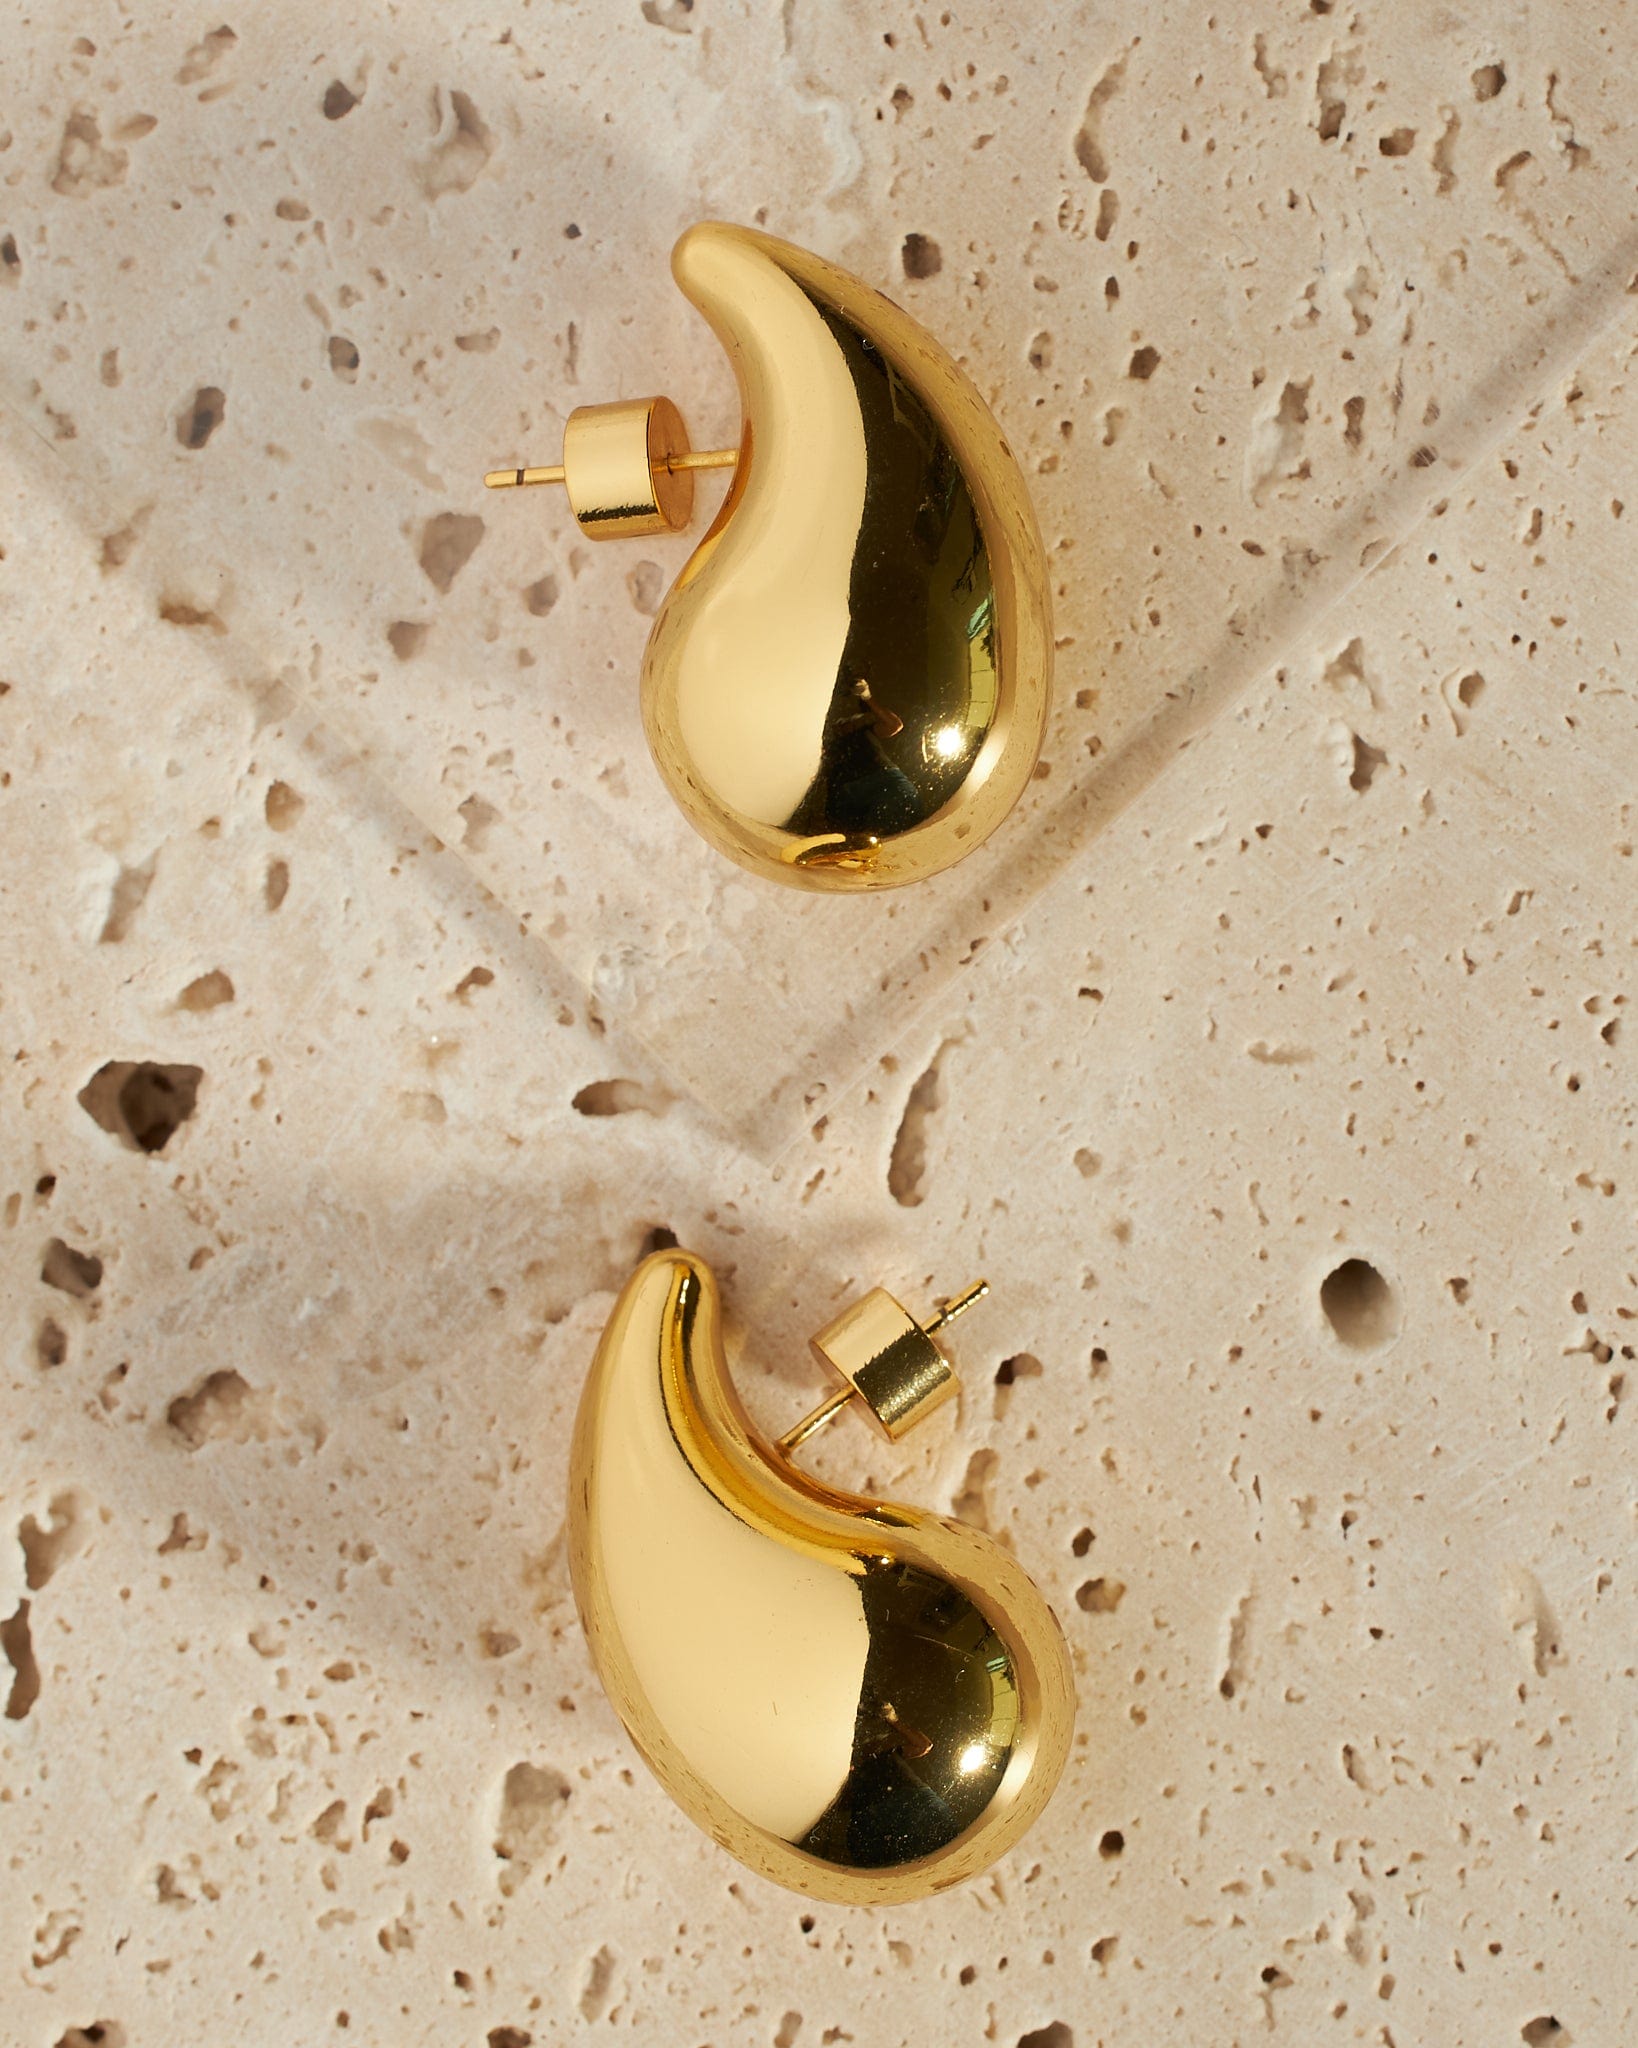 The teardrop shape and smooth, golden surface of a pair of Moda Hoop earrings stand out against the white stone slabs they rest on. 